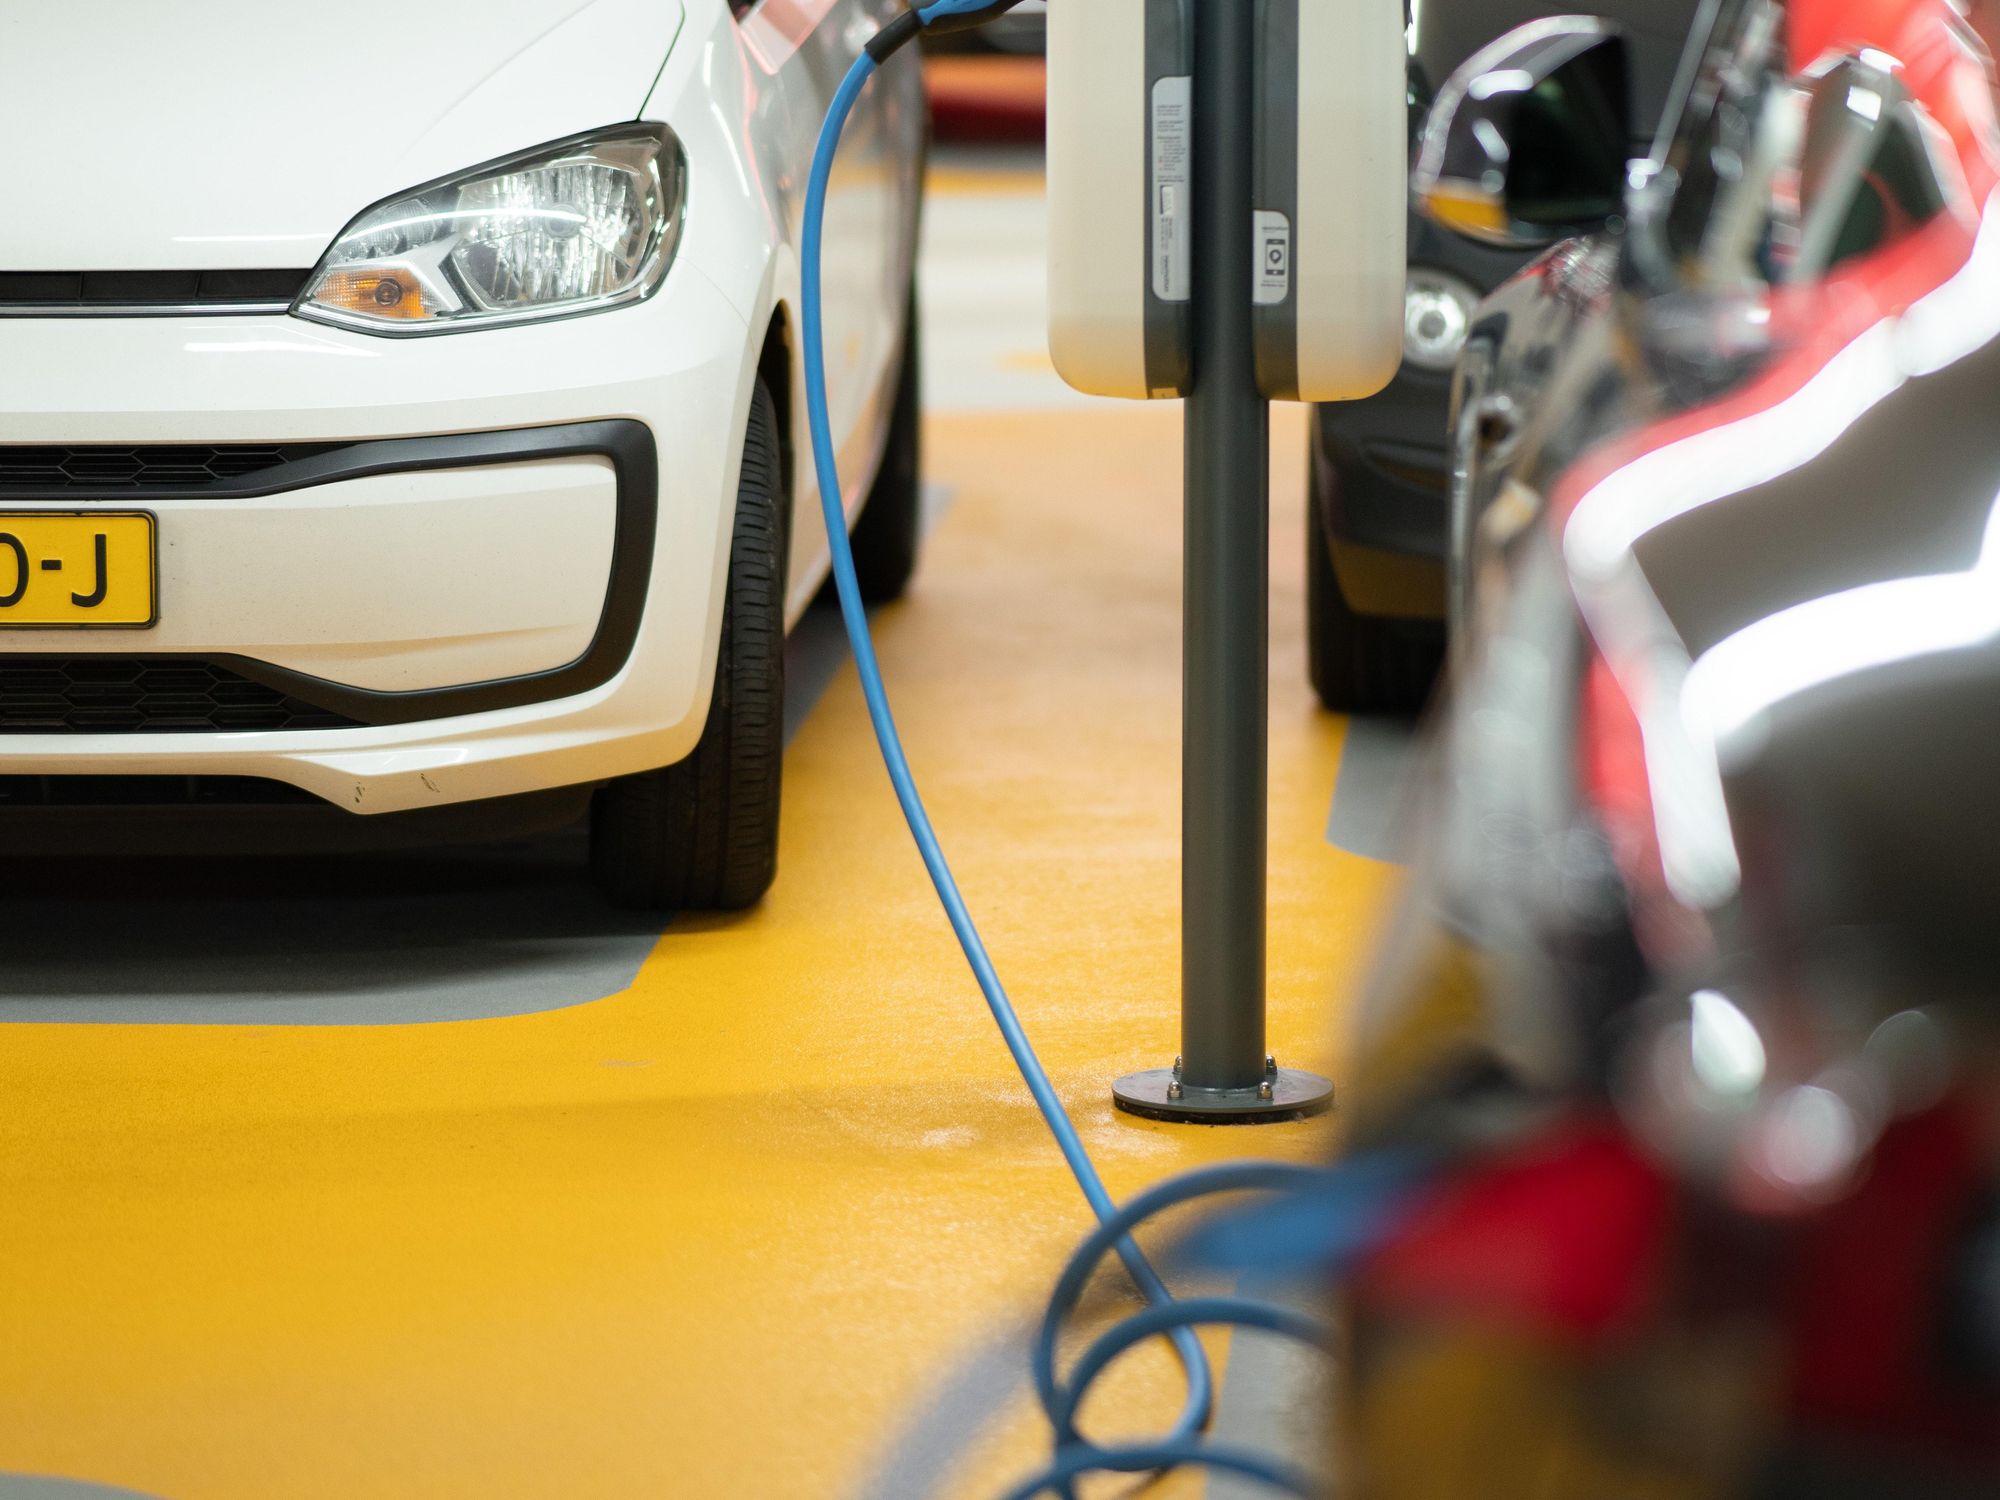 EV Charging Company Qmerit Lists the Two Biggest Hurdles Still Facing the Industry